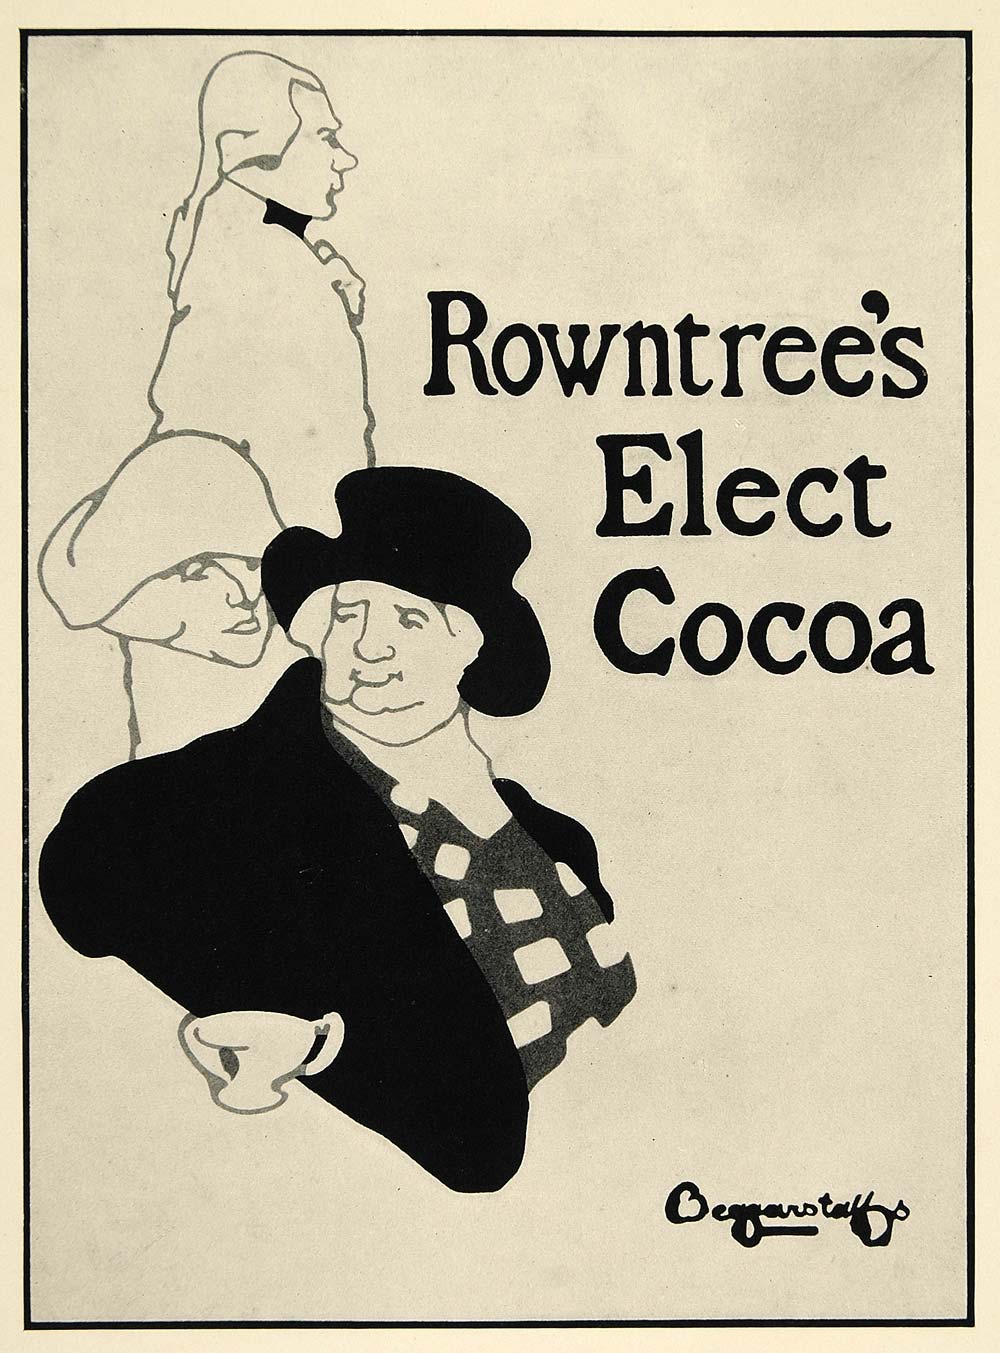 1924 Print Beggarstaff Brothers Poster Art Rowntree's Elect Cocoa Advertising